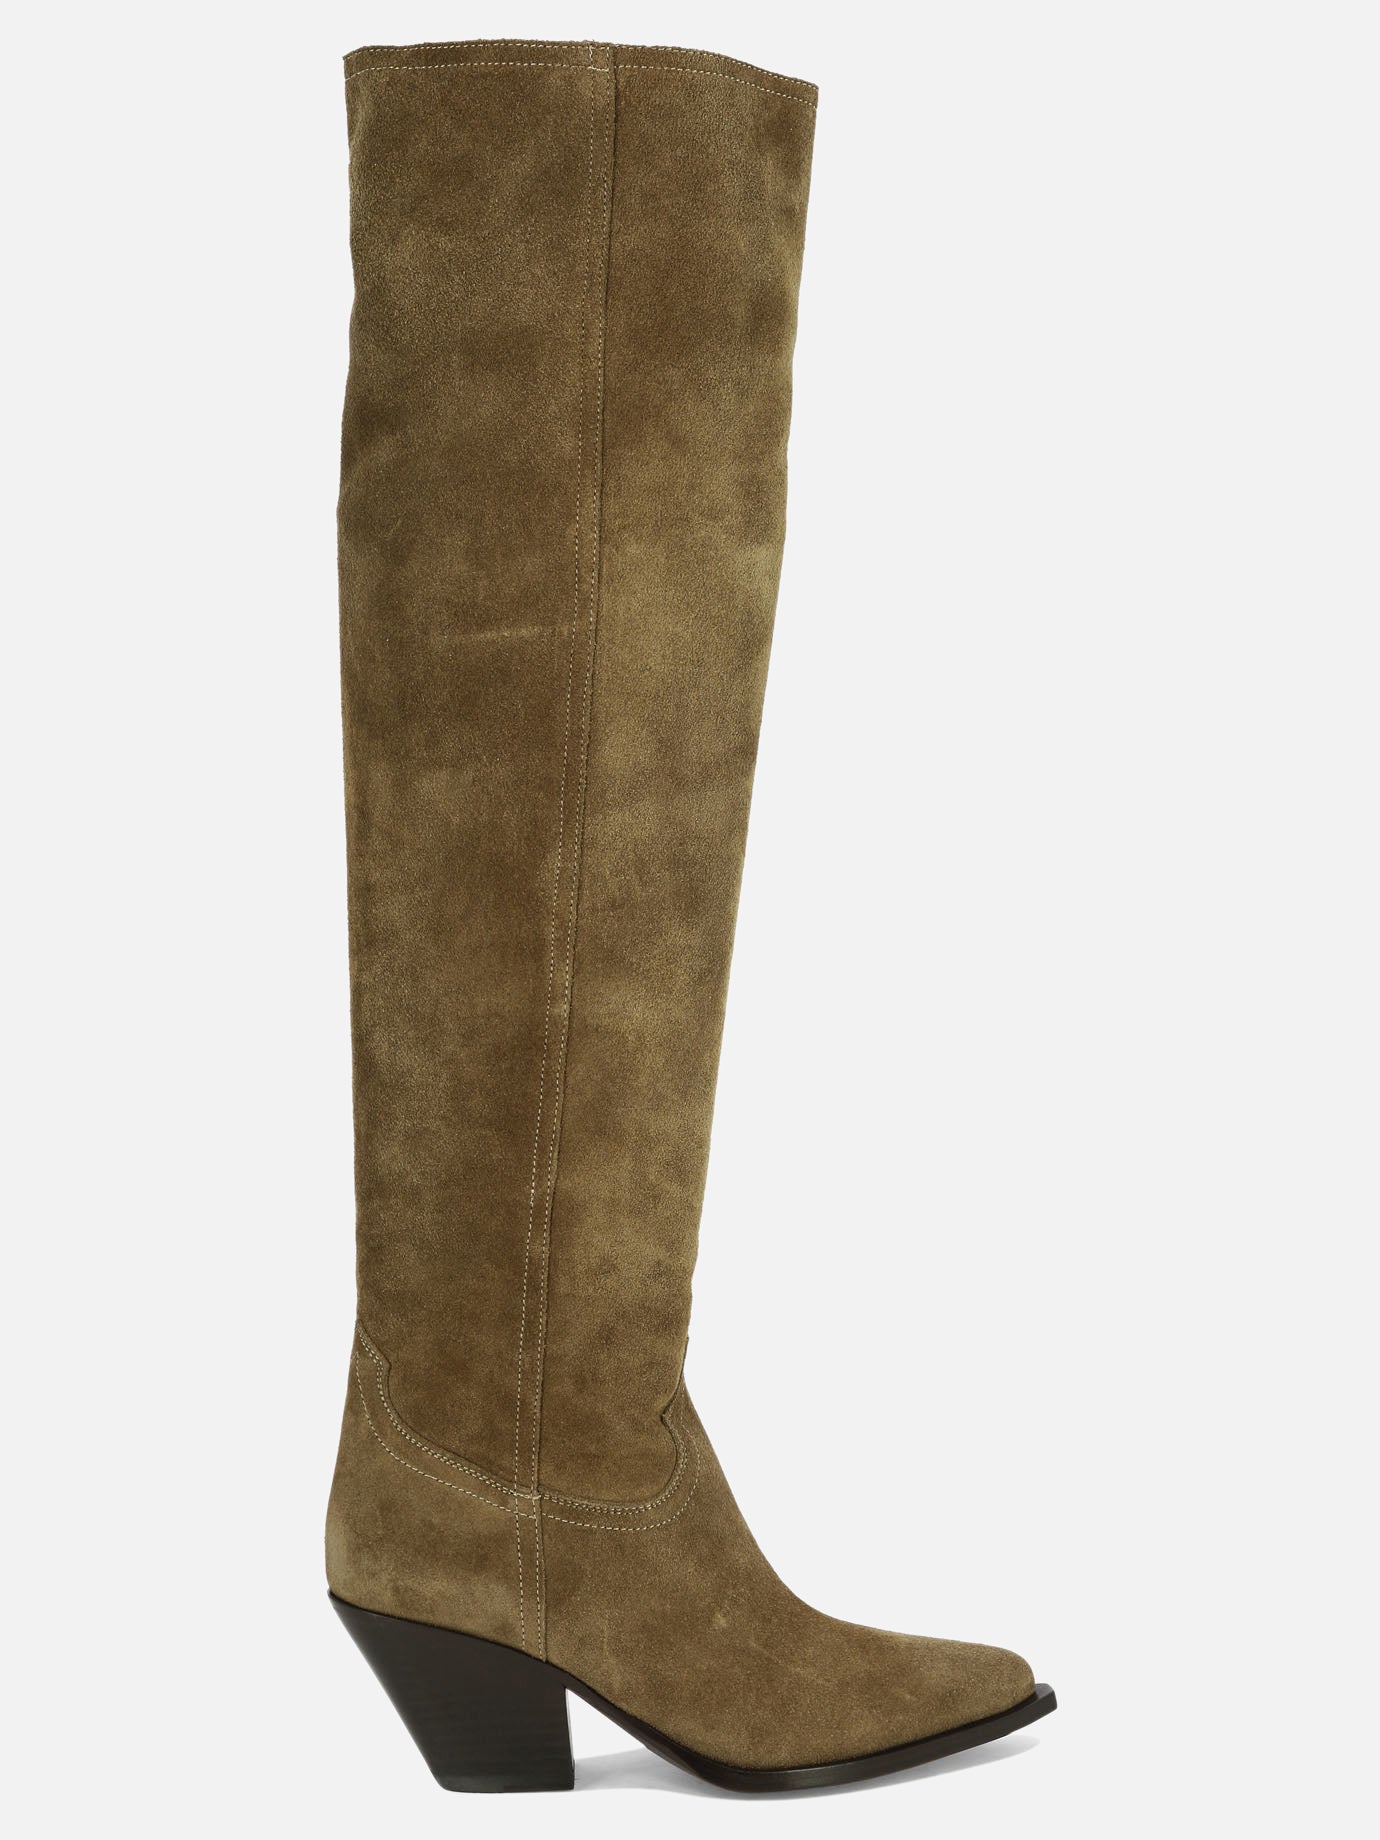 "Acapulco" boots